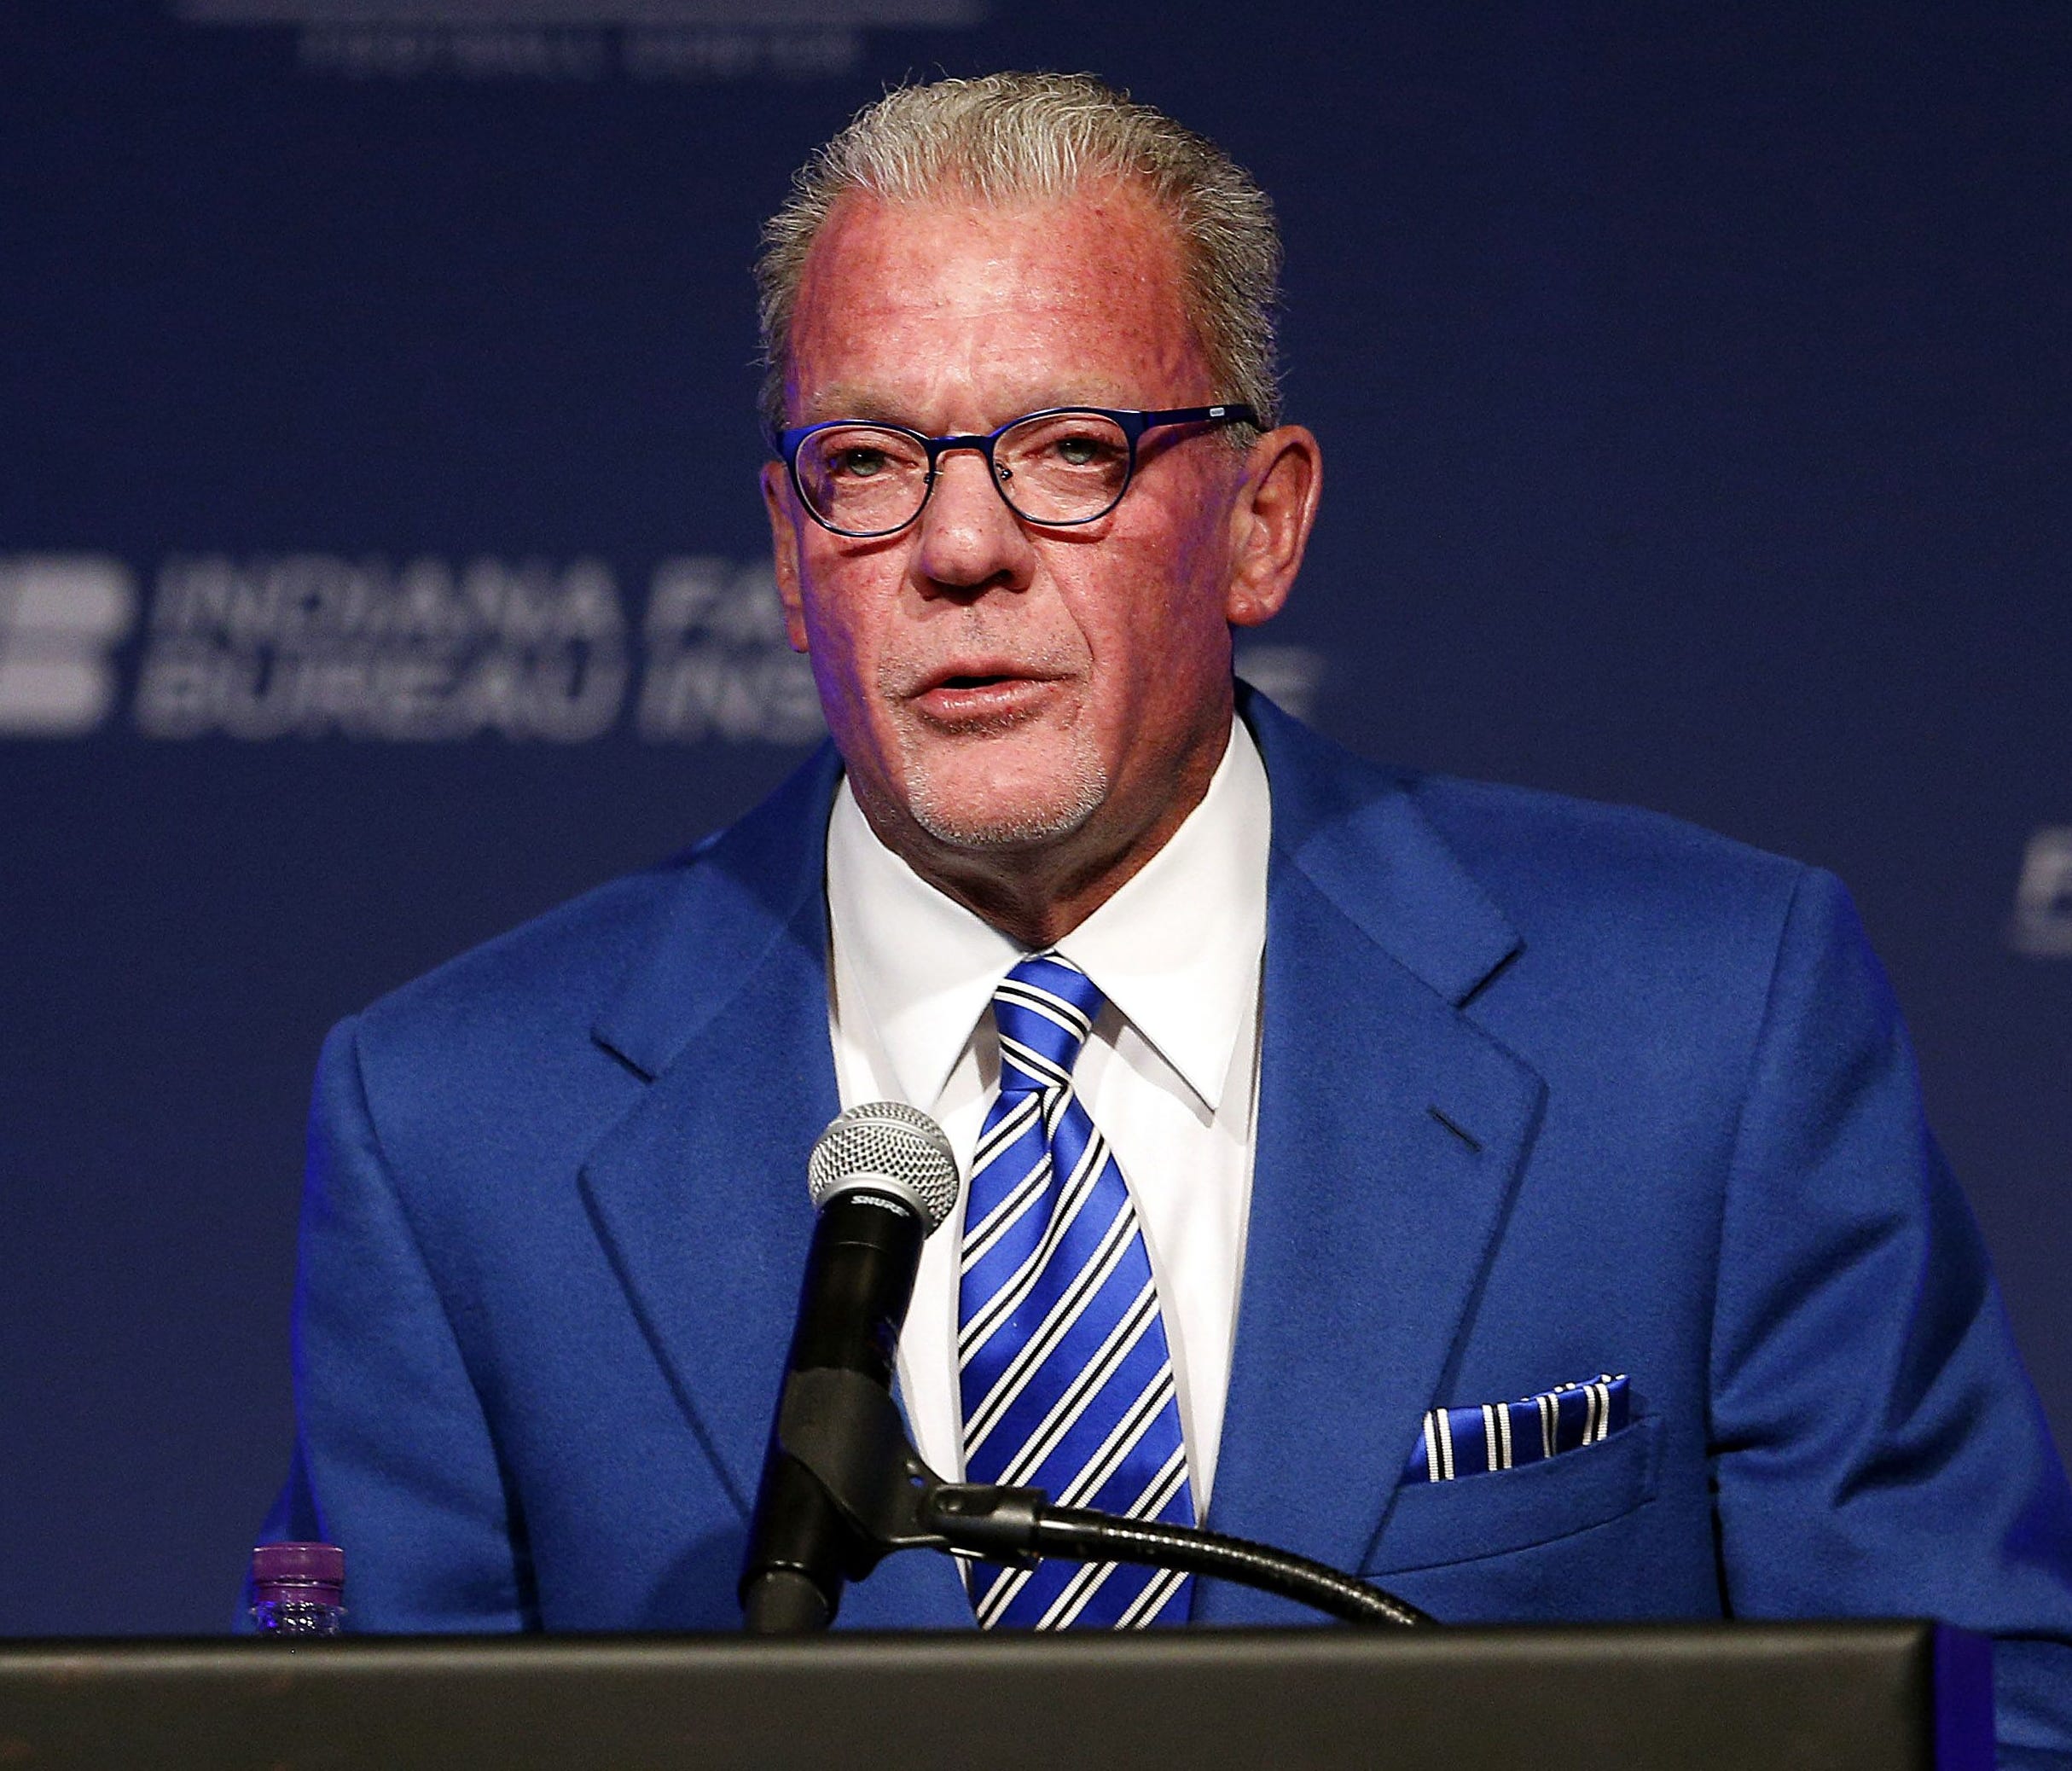 Jim Irsay's Colts reached two Super Bowls with QB Peyton Manning but only won one.